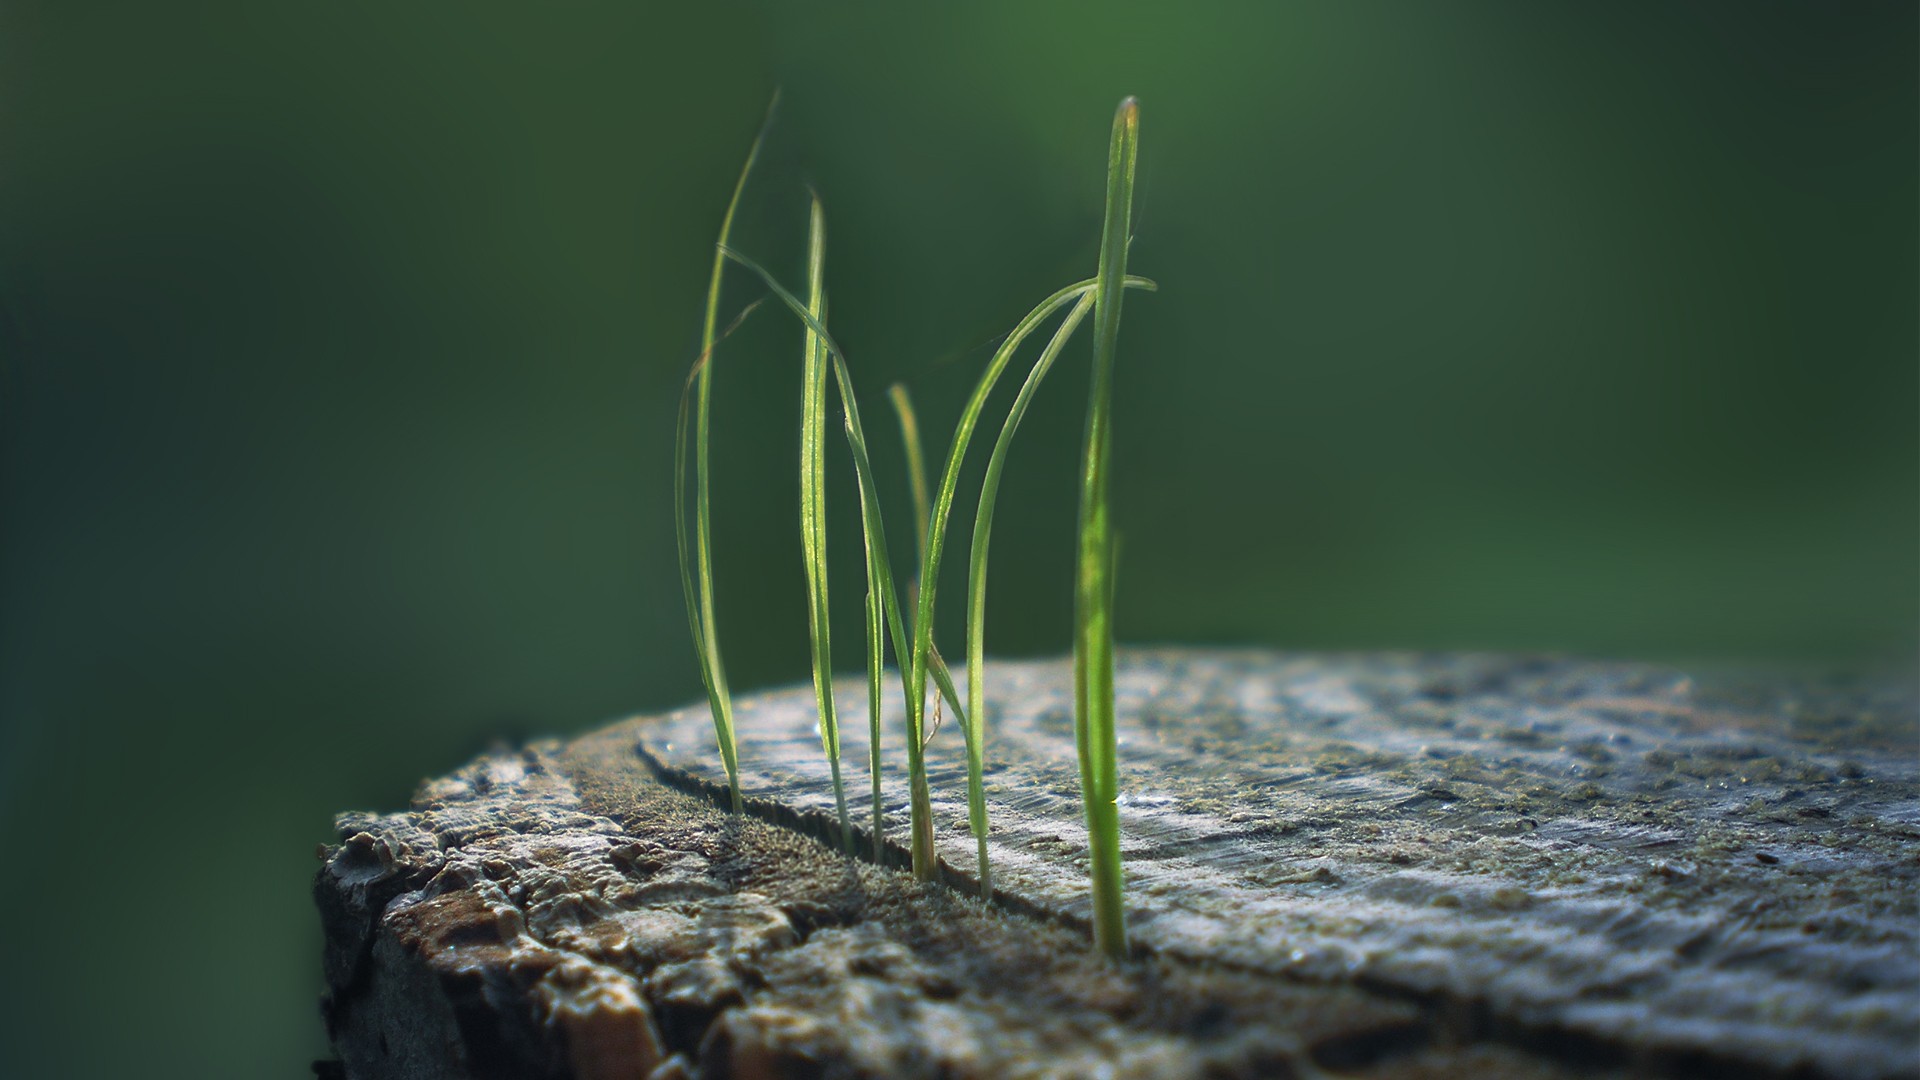 General 1920x1080 macro grass nature simple background tree trunk plants wood